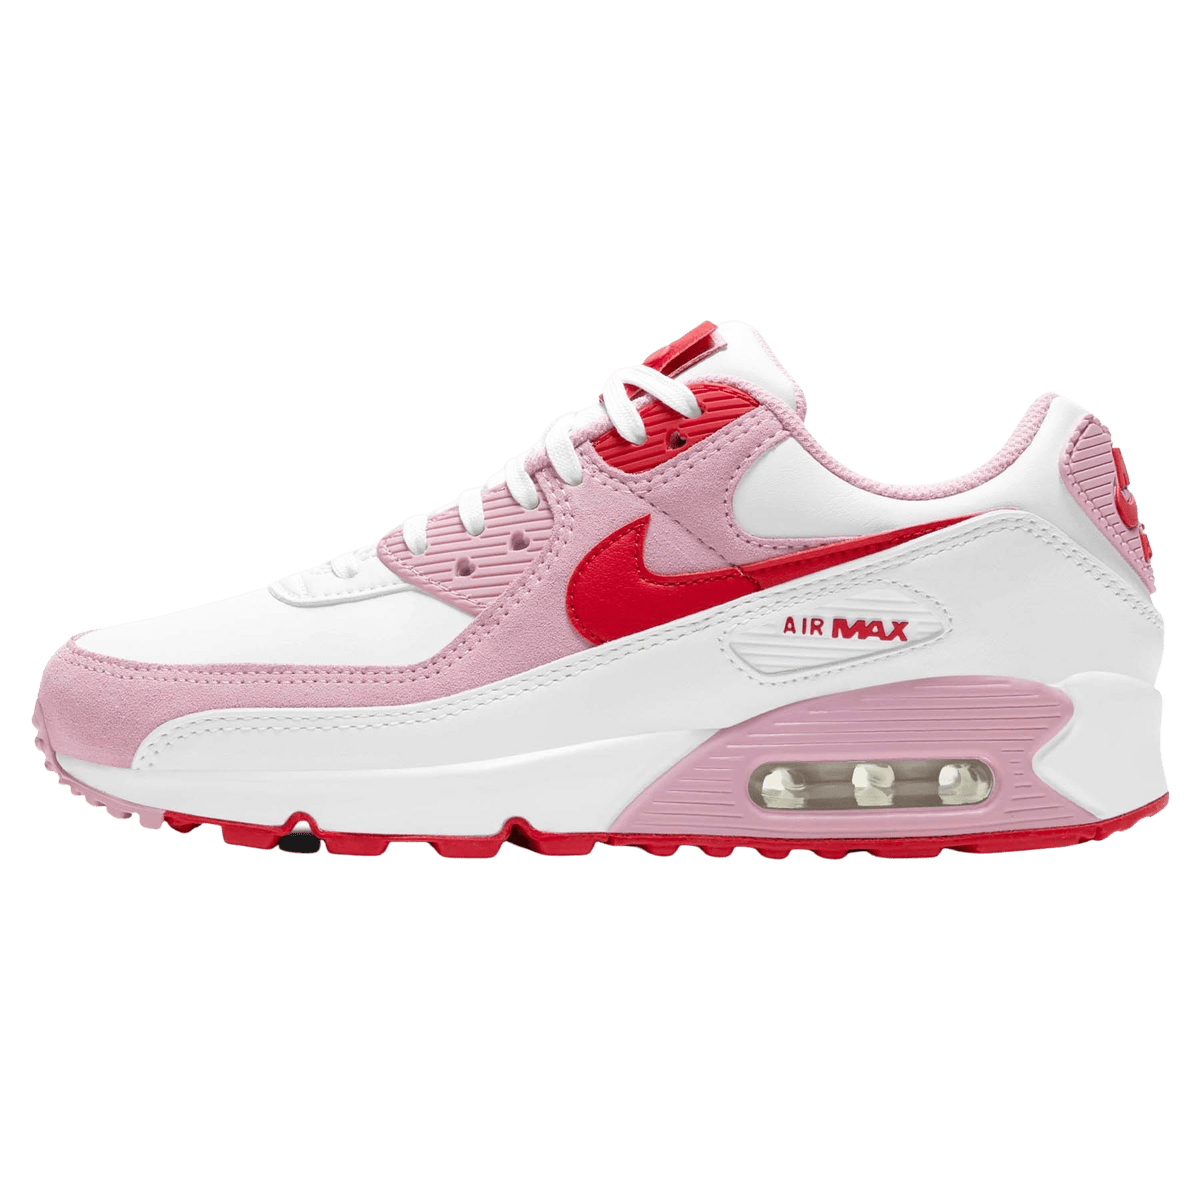 Nike Air Max 90 Wmns 'Valentine's Day' - Kick Game